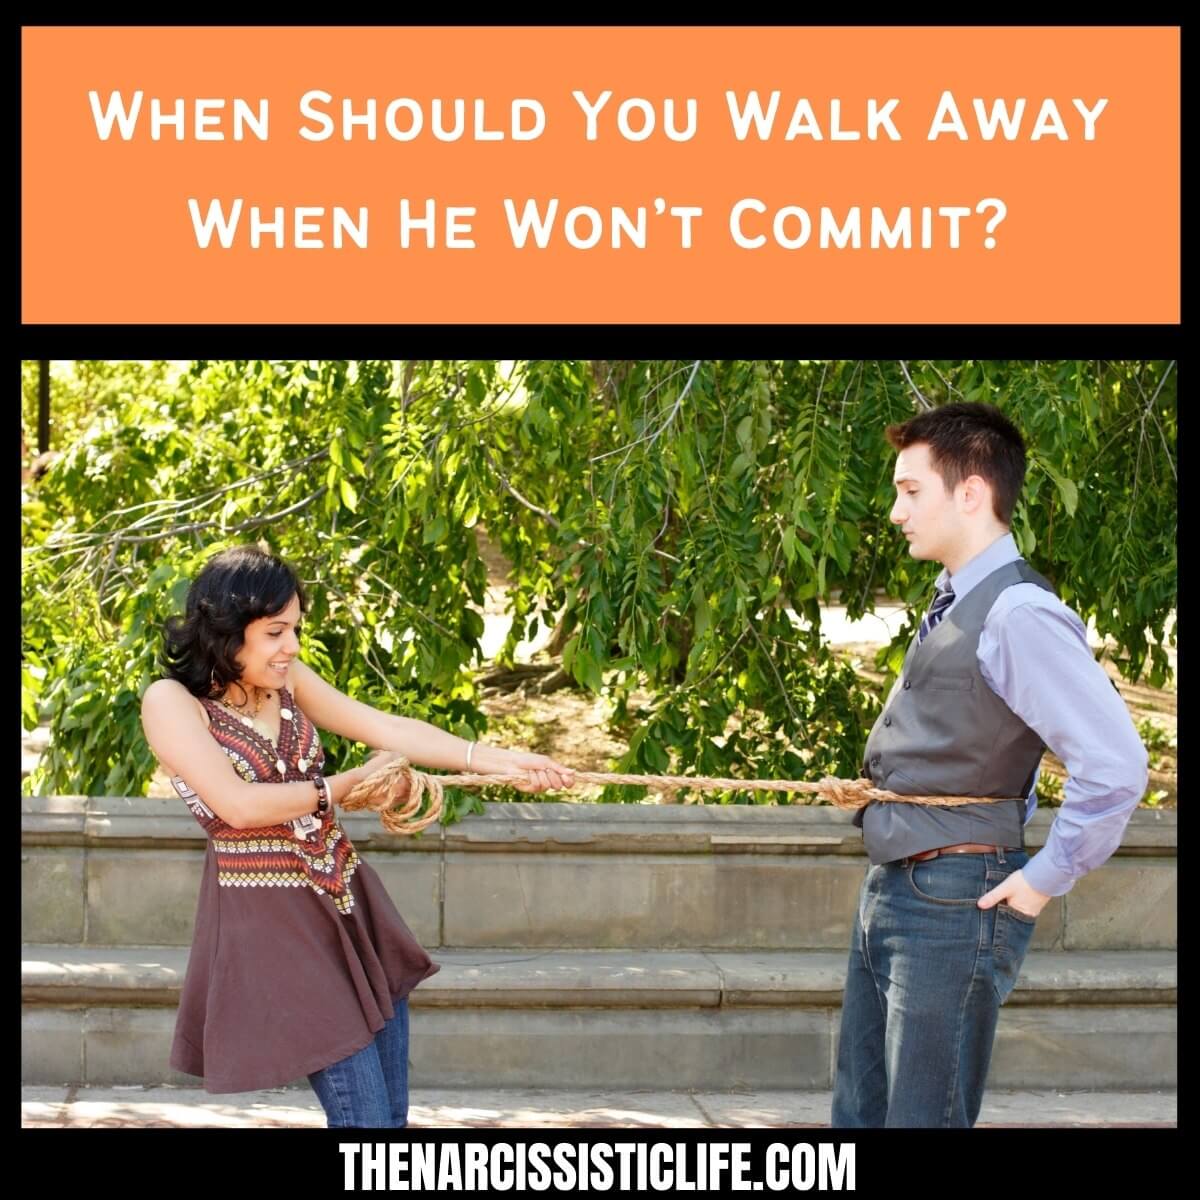 When Should You Walk Away When He Won't Commit? - The Narcissistic Life